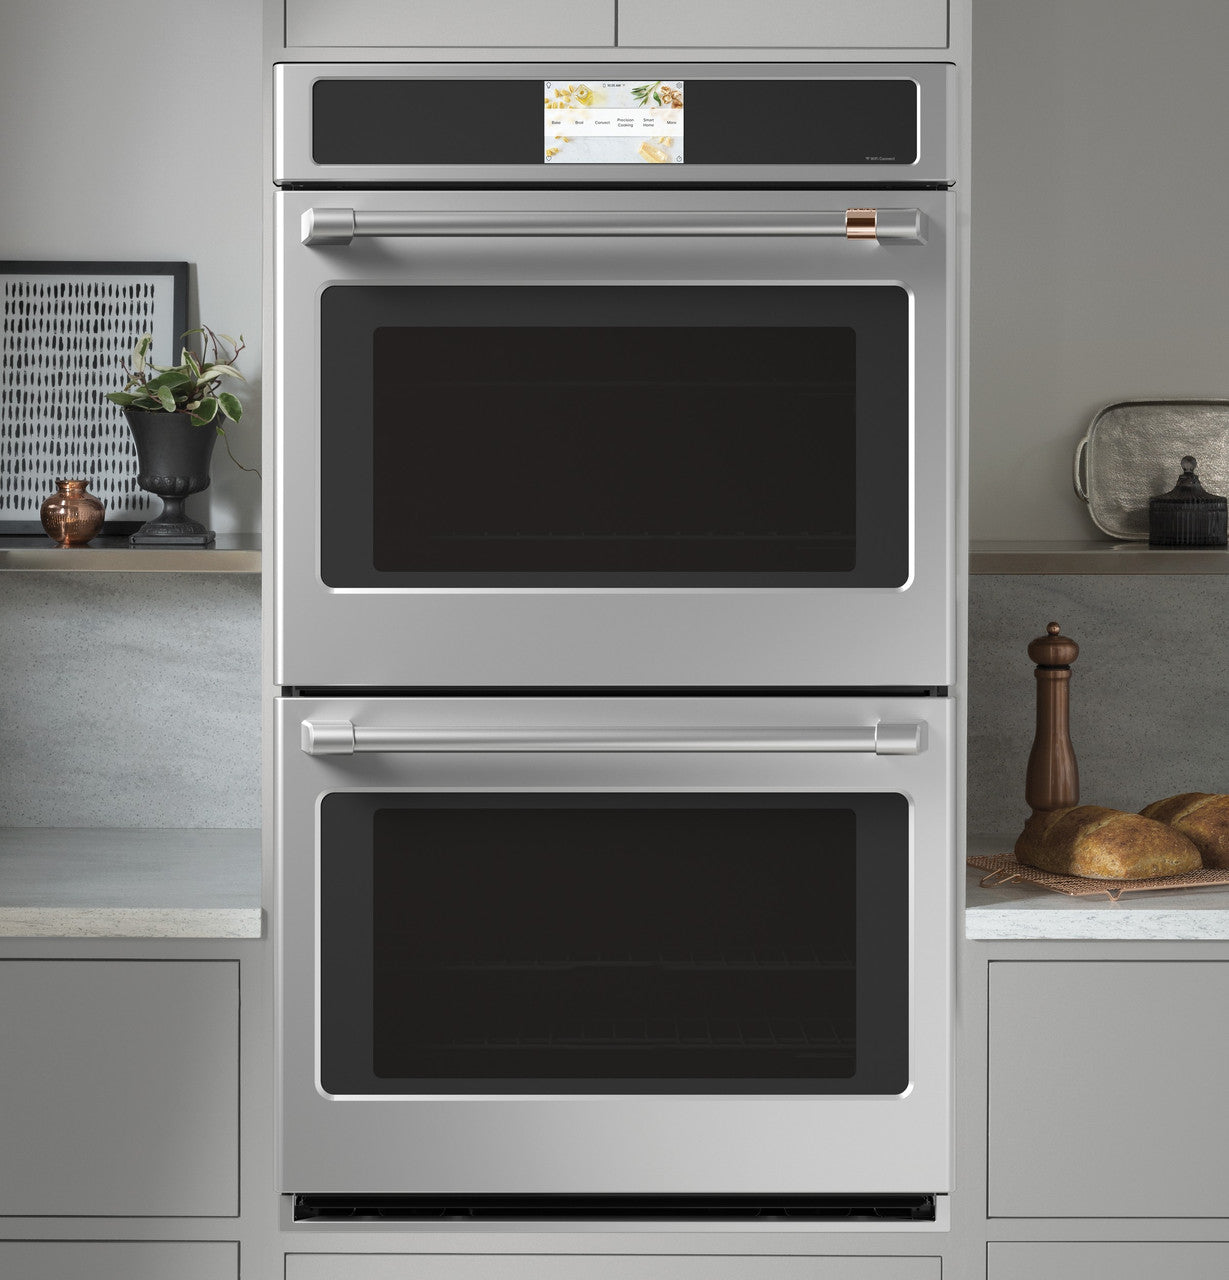 Café - 10 cu. ft Double Wall Oven in Stainless - CTD90DP2NS1